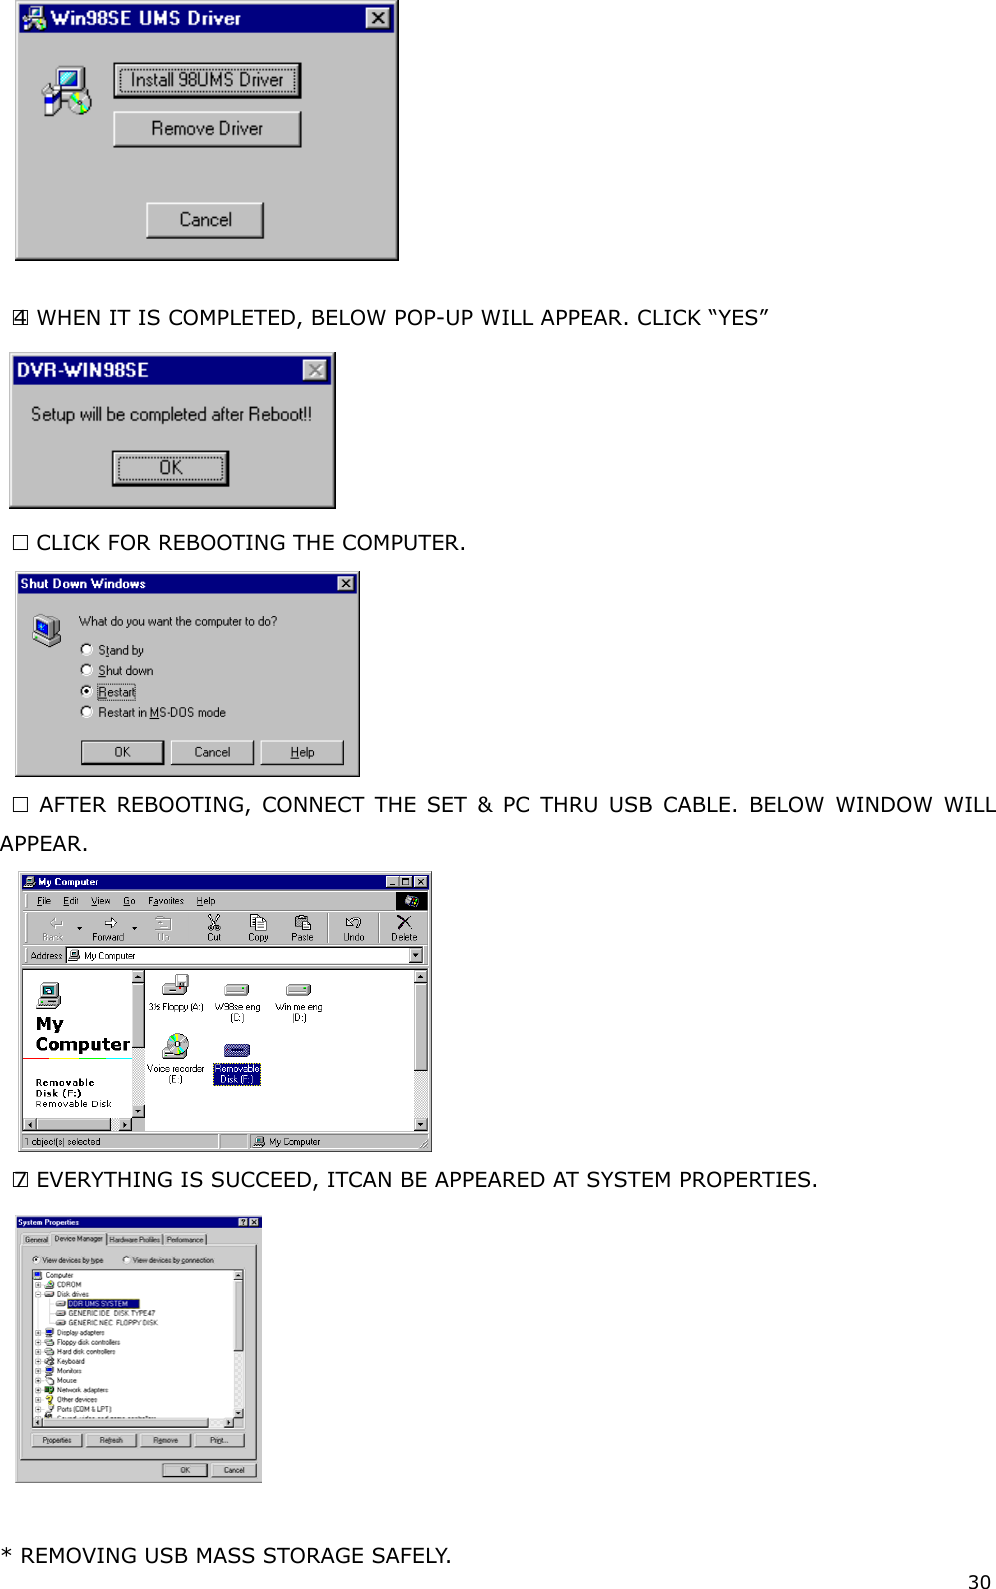 30     4  WHEN IT IS COMPLETED, BELOW POP-UP WILL APPEAR. CLICK “YES”   CLICK FOR REBOOTING THE COMPUTER.    AFTER REBOOTING, CONNECT THE SET &amp; PC THRU USB CABLE. BELOW WINDOW WILL APPEAR.  7  EVERYTHING IS SUCCEED, ITCAN BE APPEARED AT SYSTEM PROPERTIES.    * REMOVING USB MASS STORAGE SAFELY. 